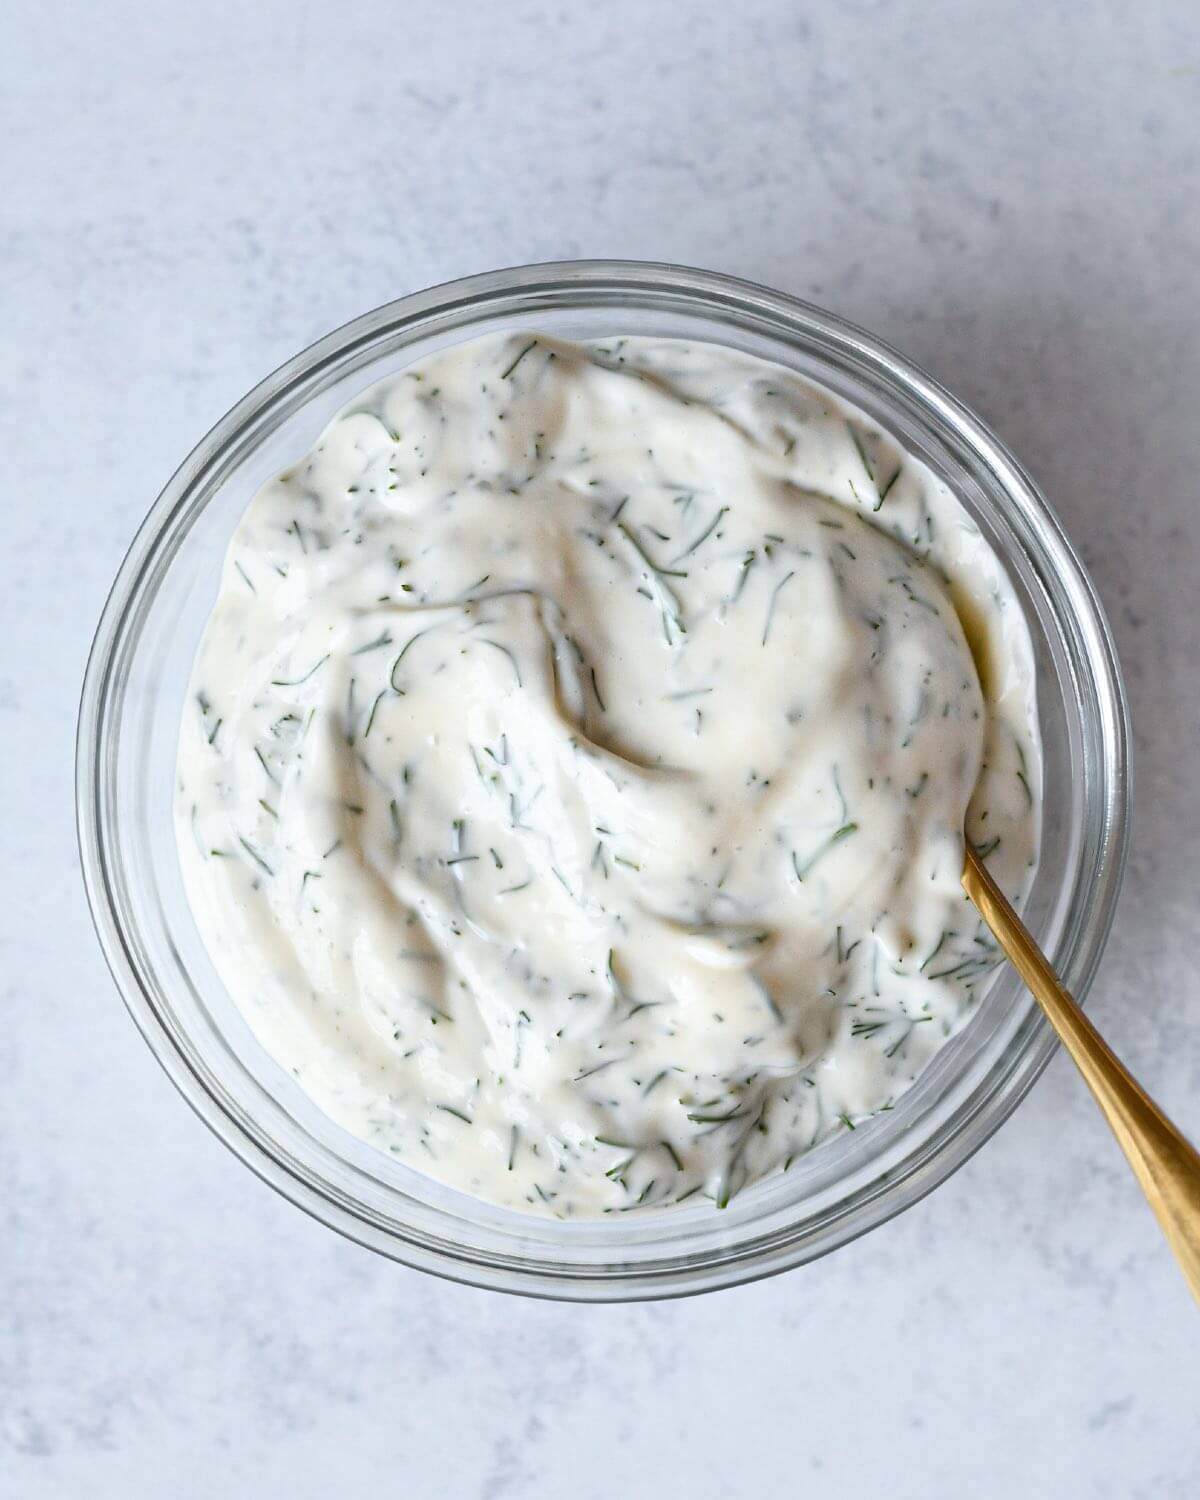 creamy dill mayo in a small round glass bowl.